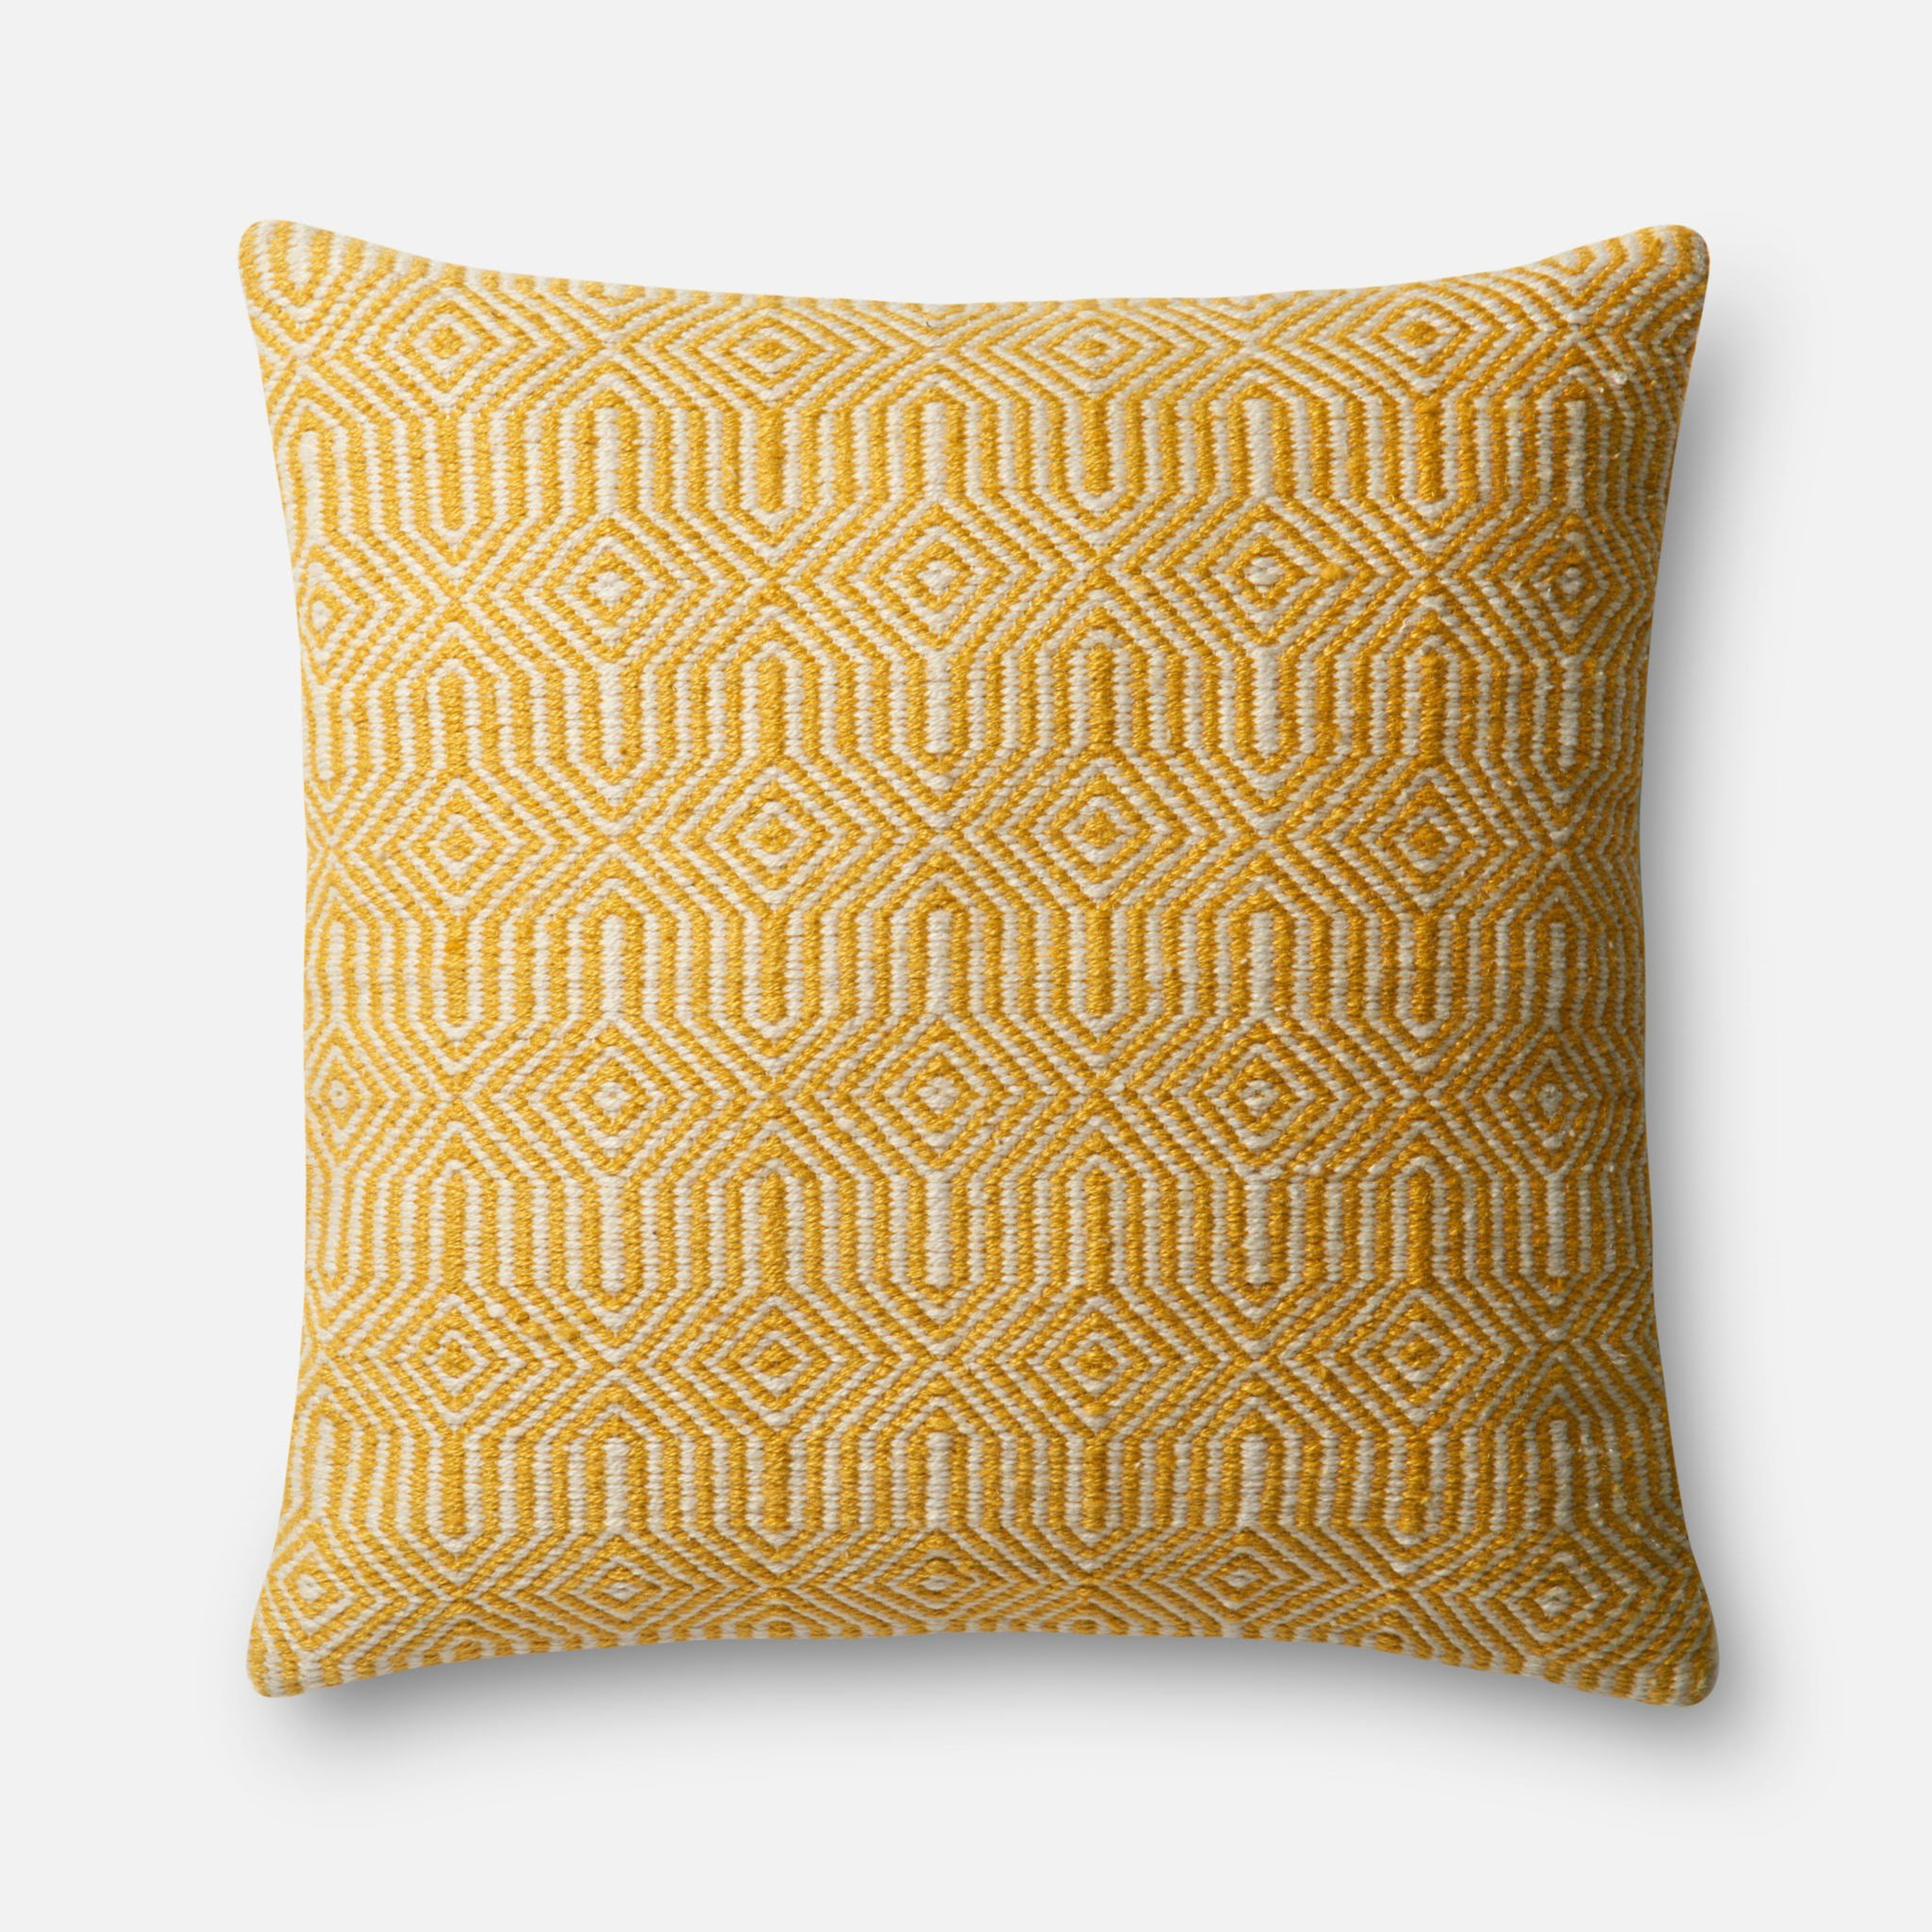 Indoor/Outdoor Throw Pillow with Down Fill, Yellow & Ivory, 22" x 22" - Loma Threads